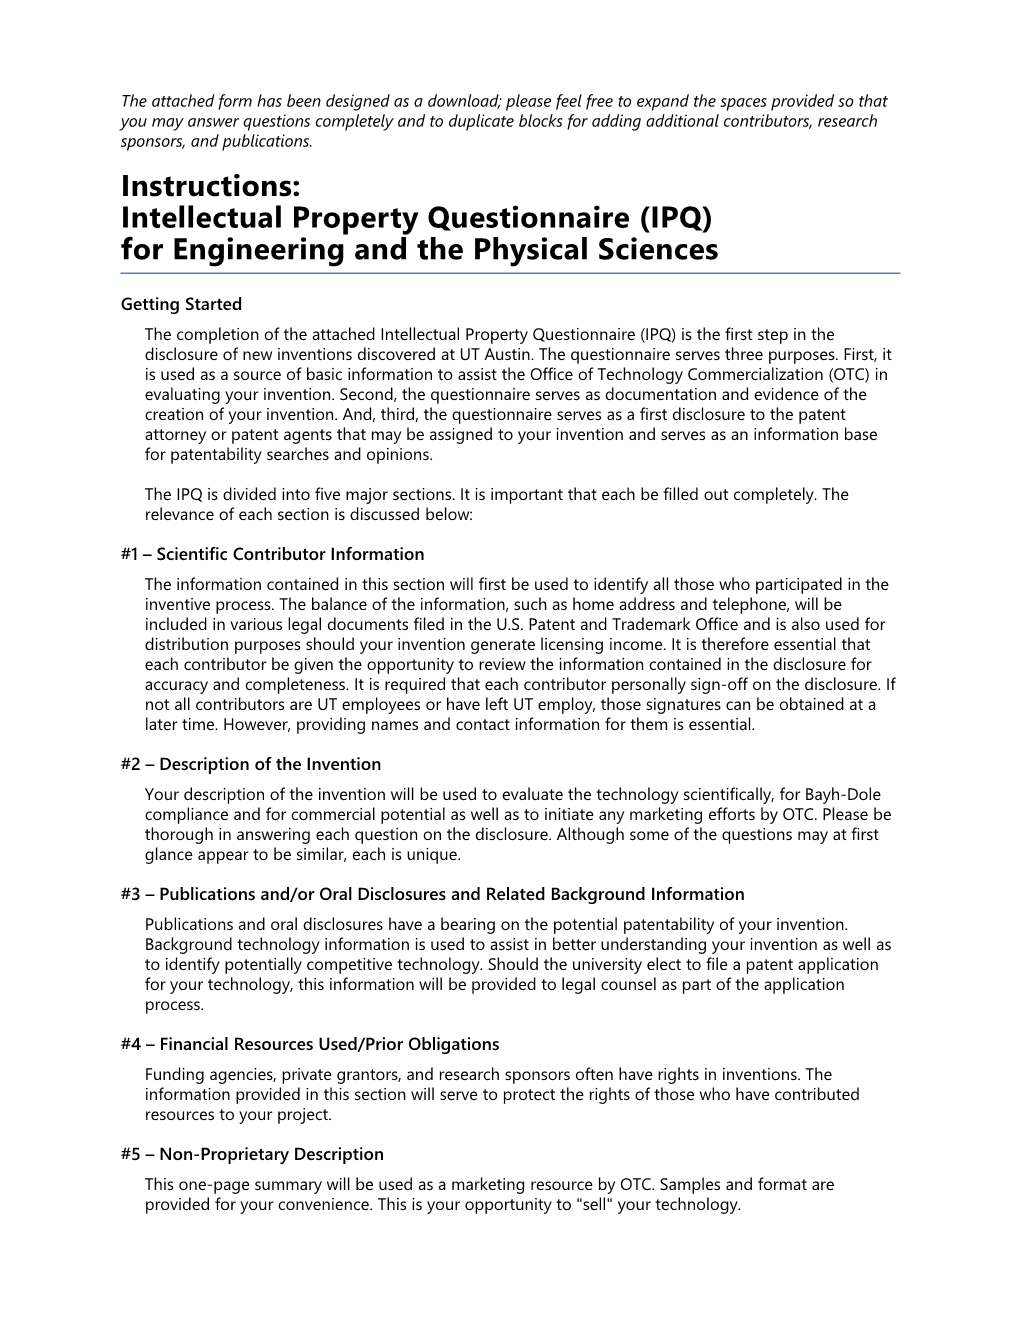 Intellectual Property Questionnaire - Eng/Phys